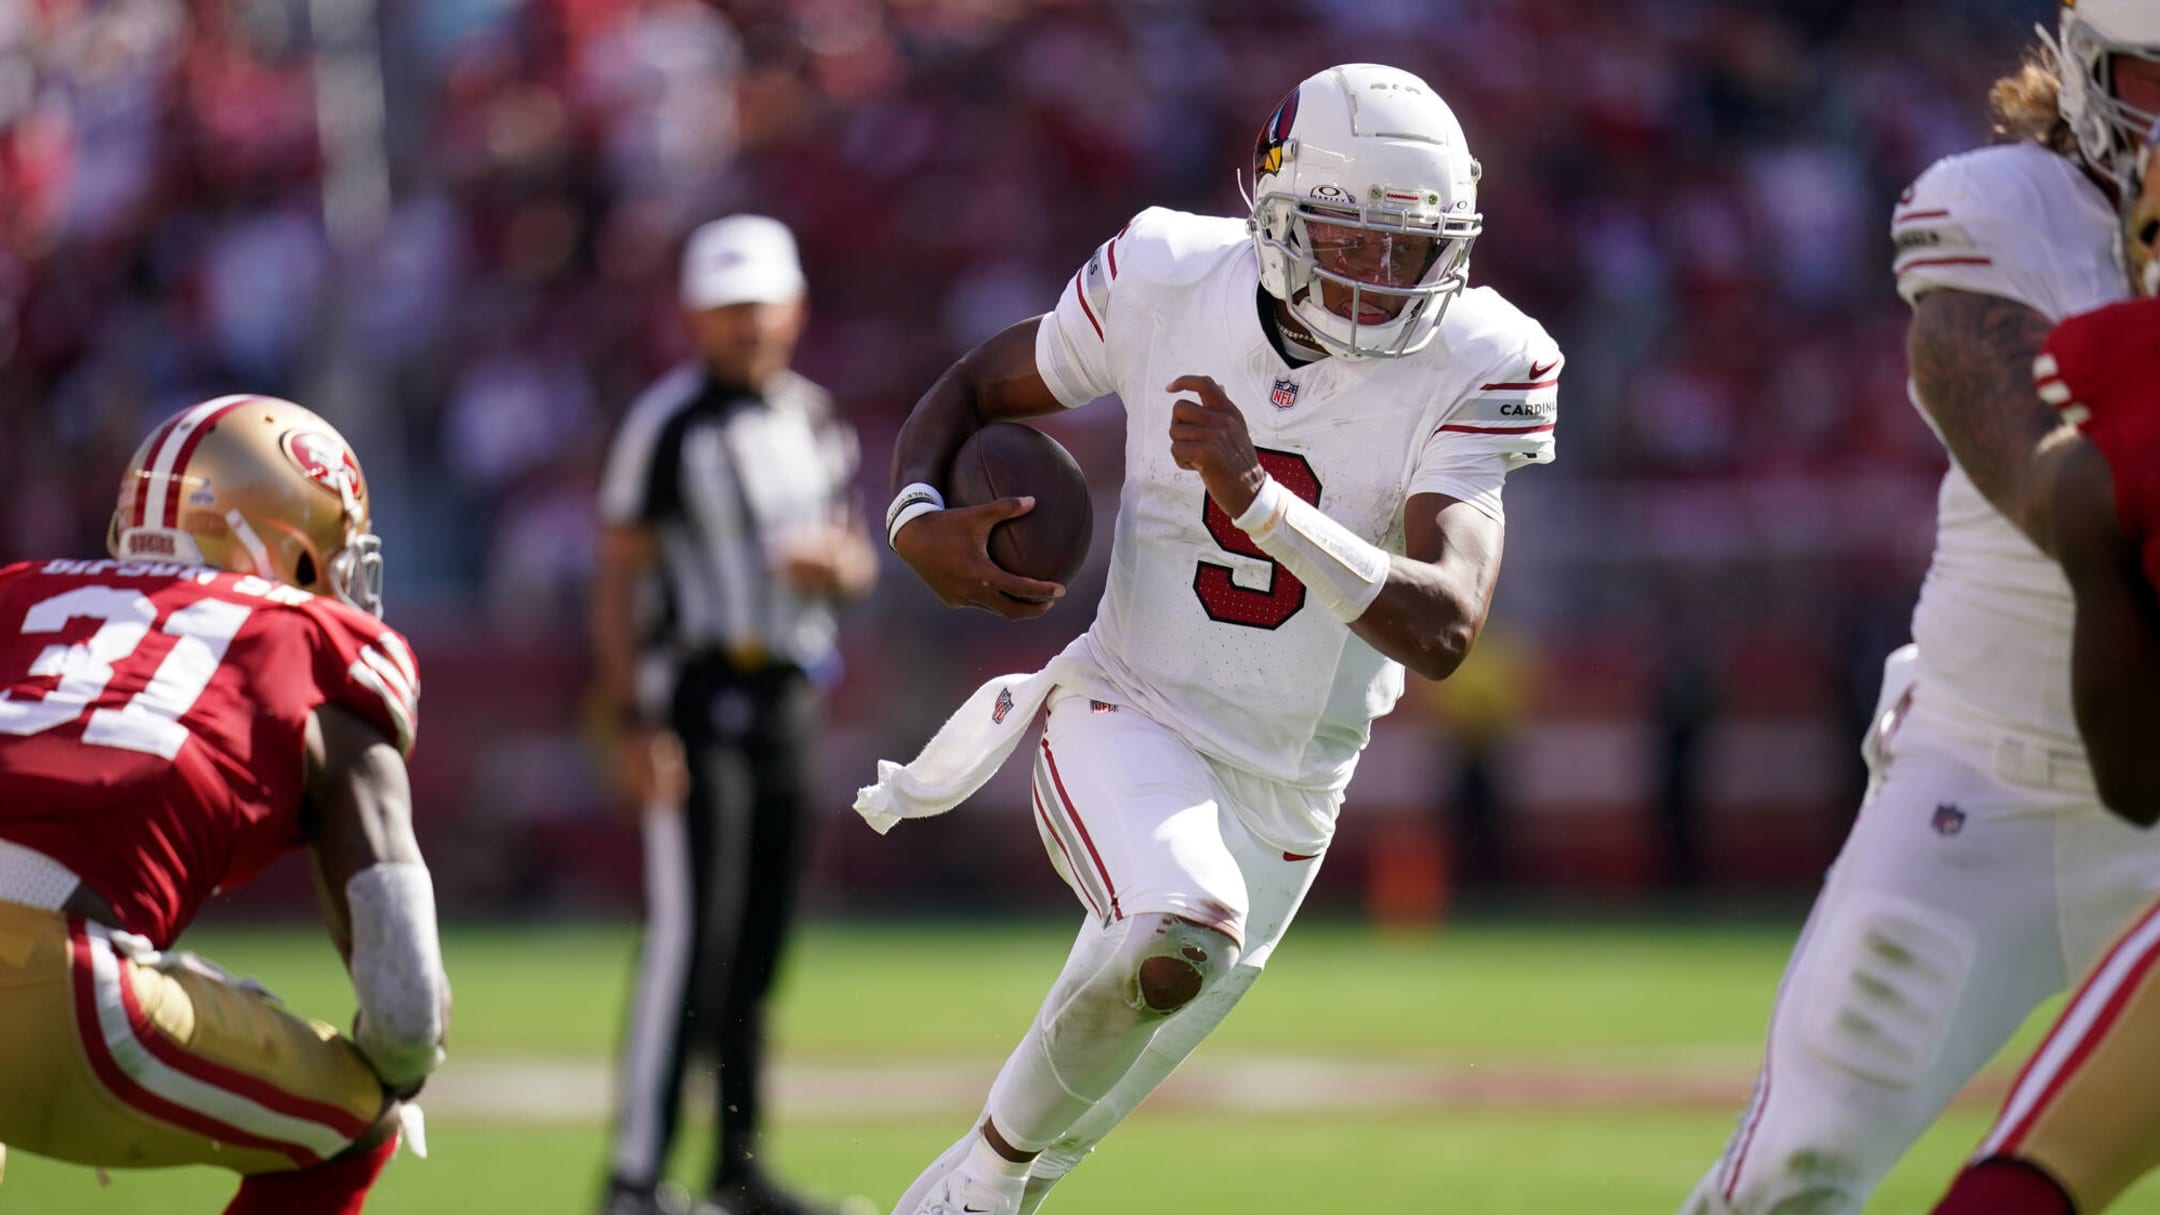 Cardinals battle, but 49ers are just too good - PHNX